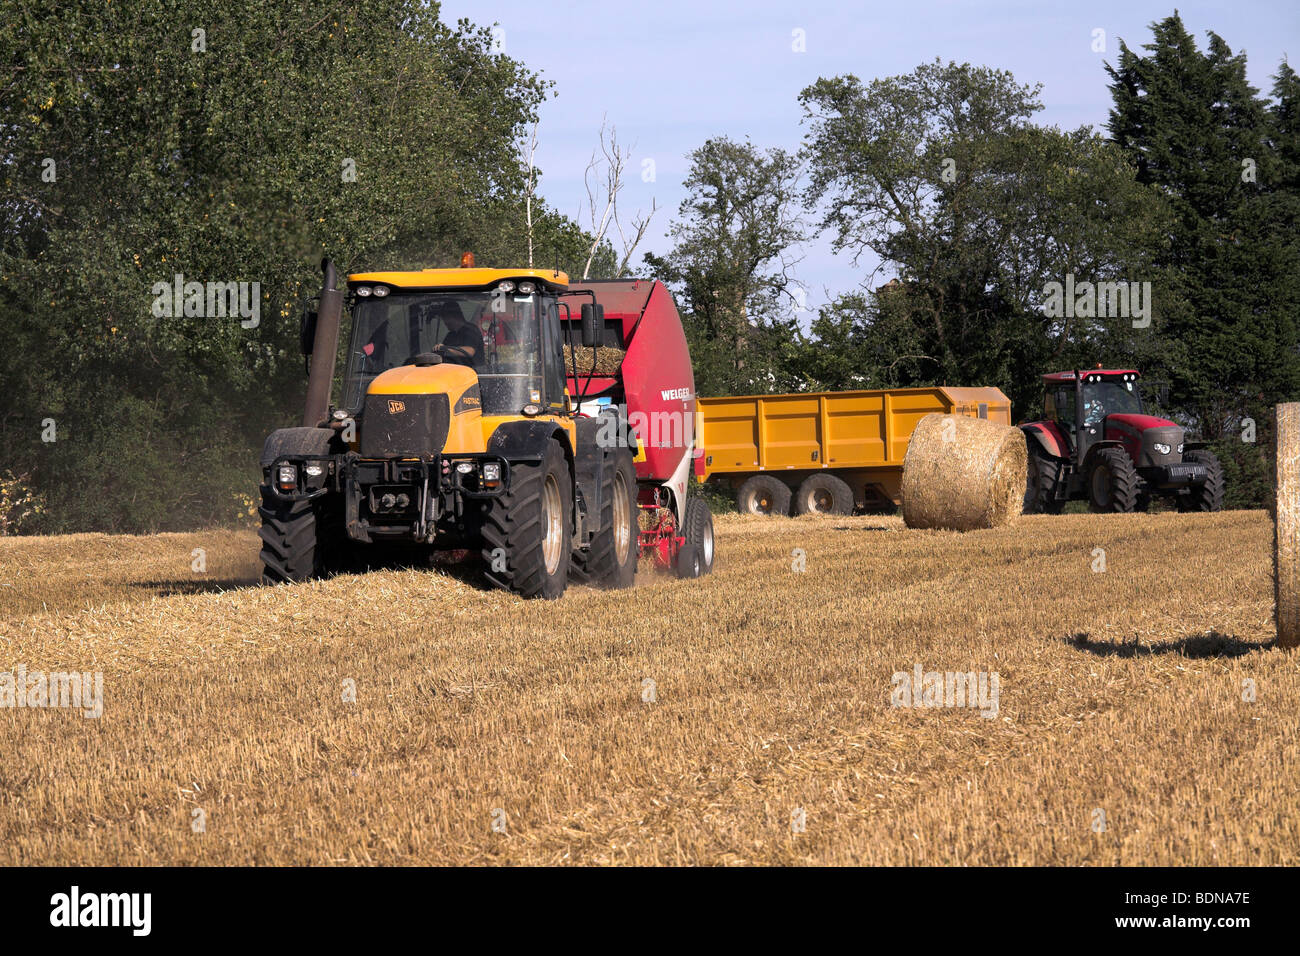 Tractor and straw baler working in a field Stock Photo